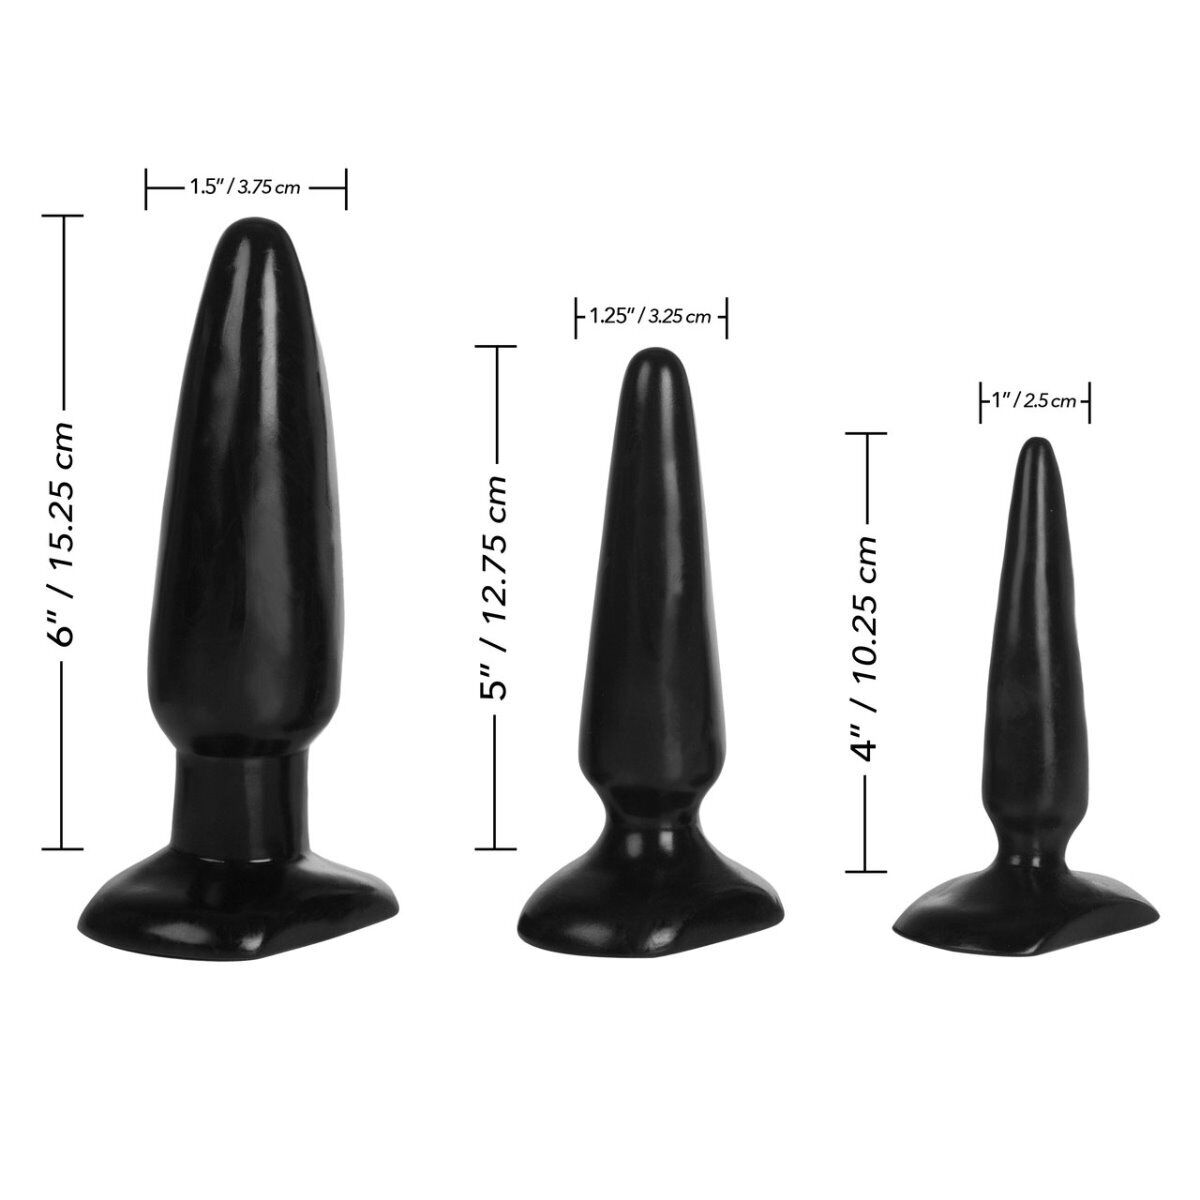 Beginner Colt Anal Trainer Kit Butt Plugs Small Medium Large Anal Dildo Sex Toy